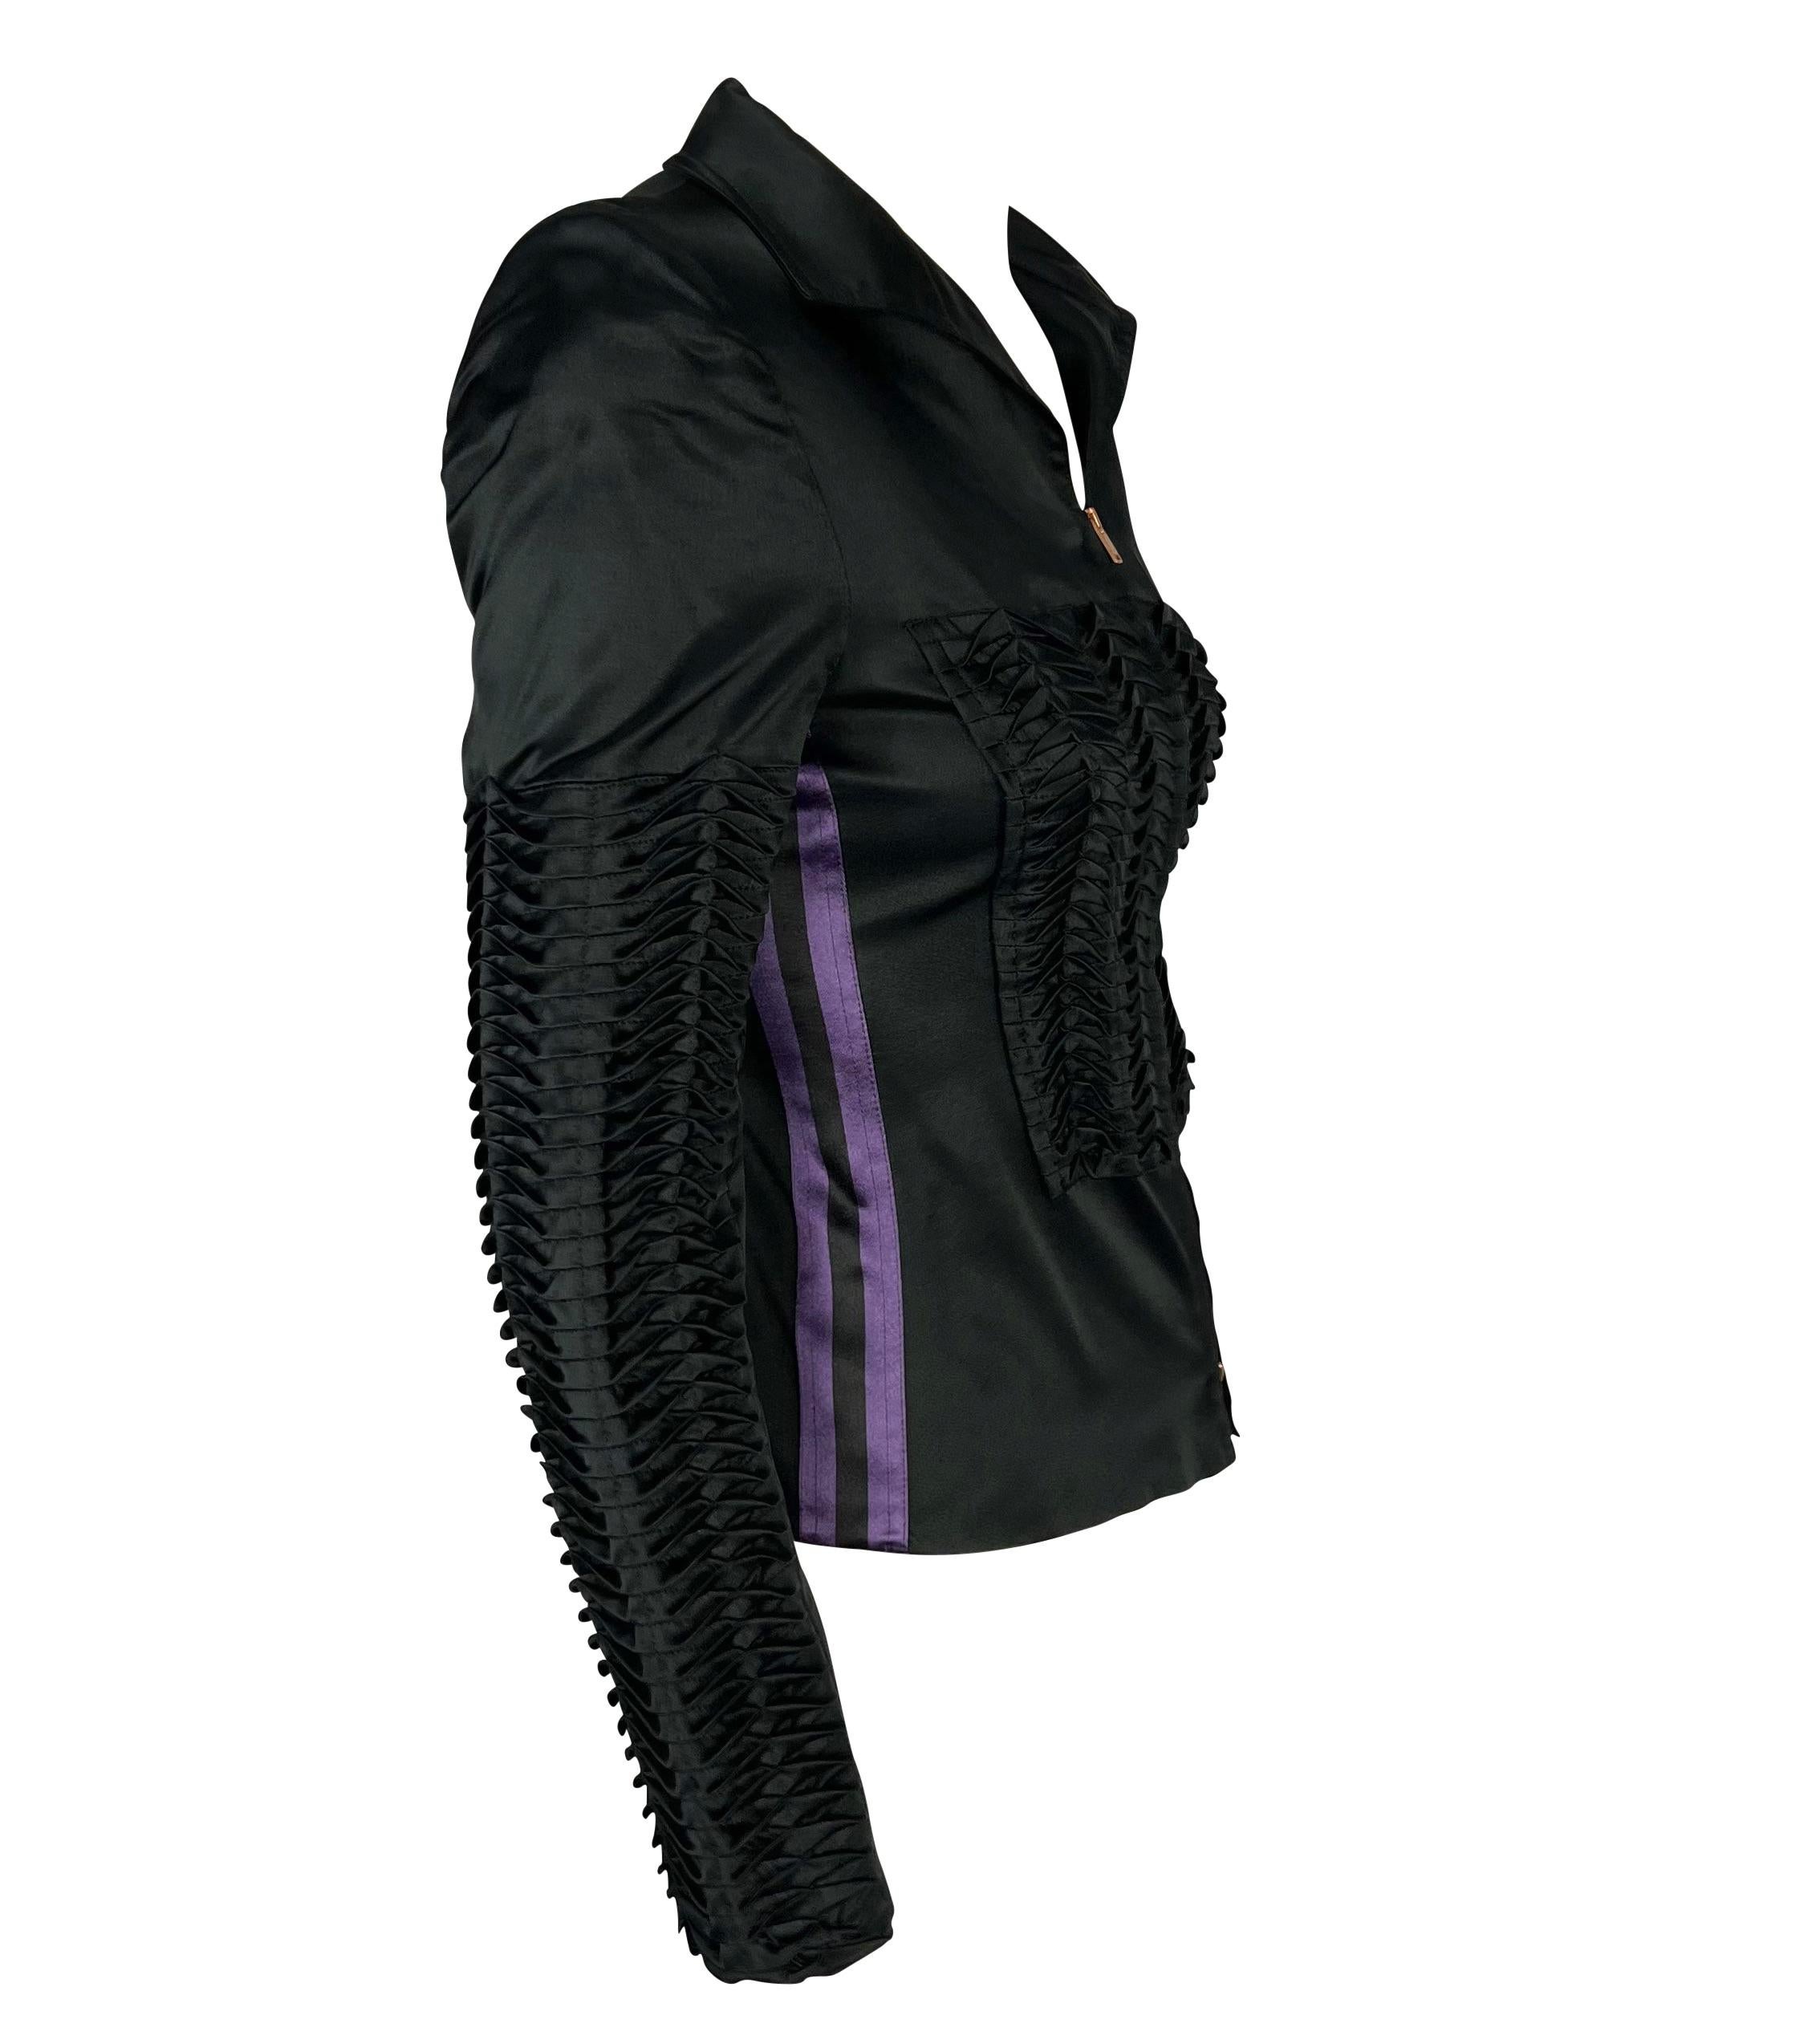 S/S 2004 Gucci by Tom Ford Runway Black Pleated Satin Purple Stripe Jacket For Sale 4